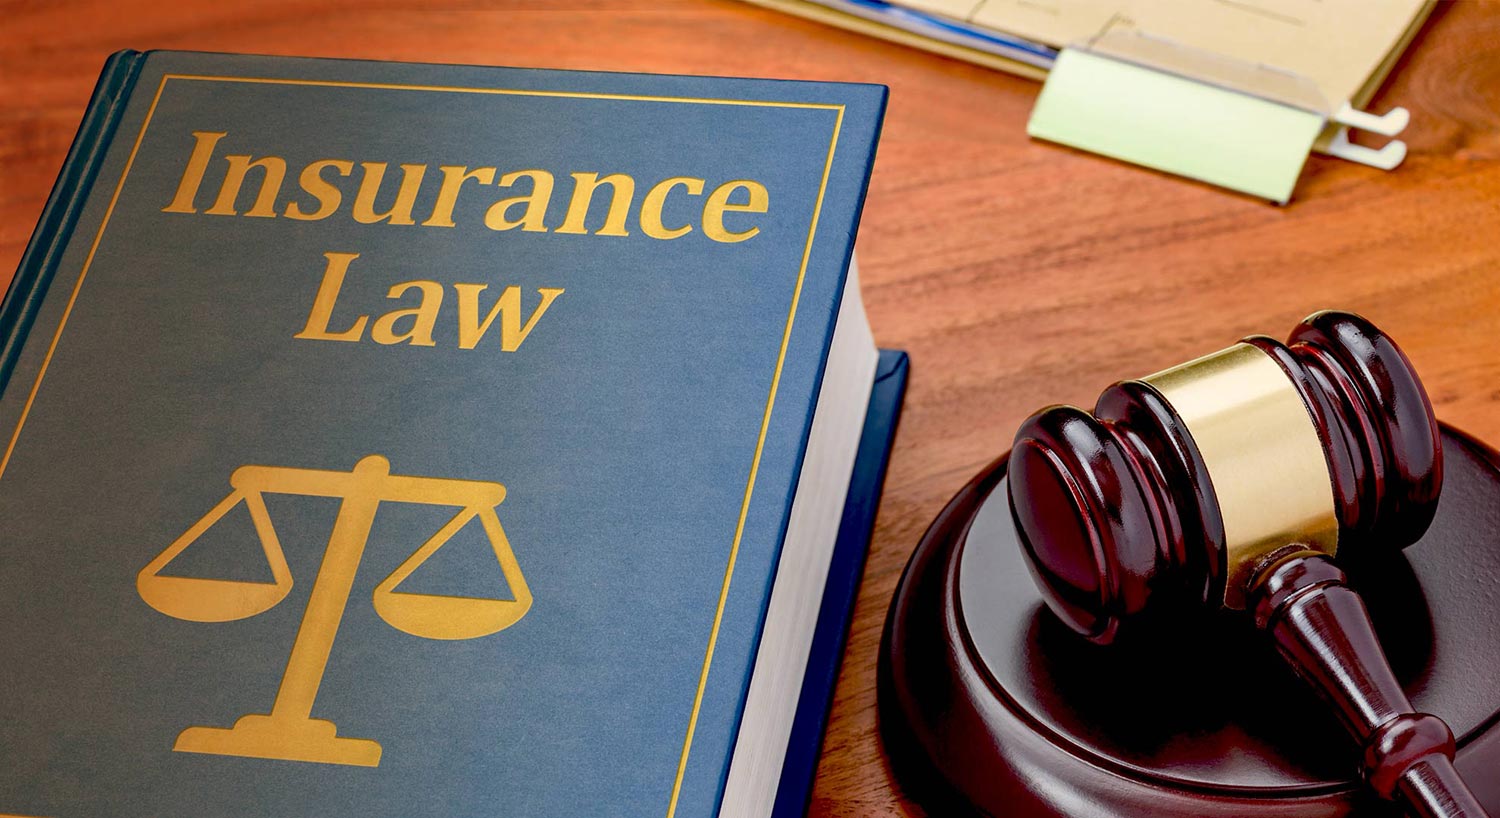 Workers Compensation Insurance Laws and Penalties